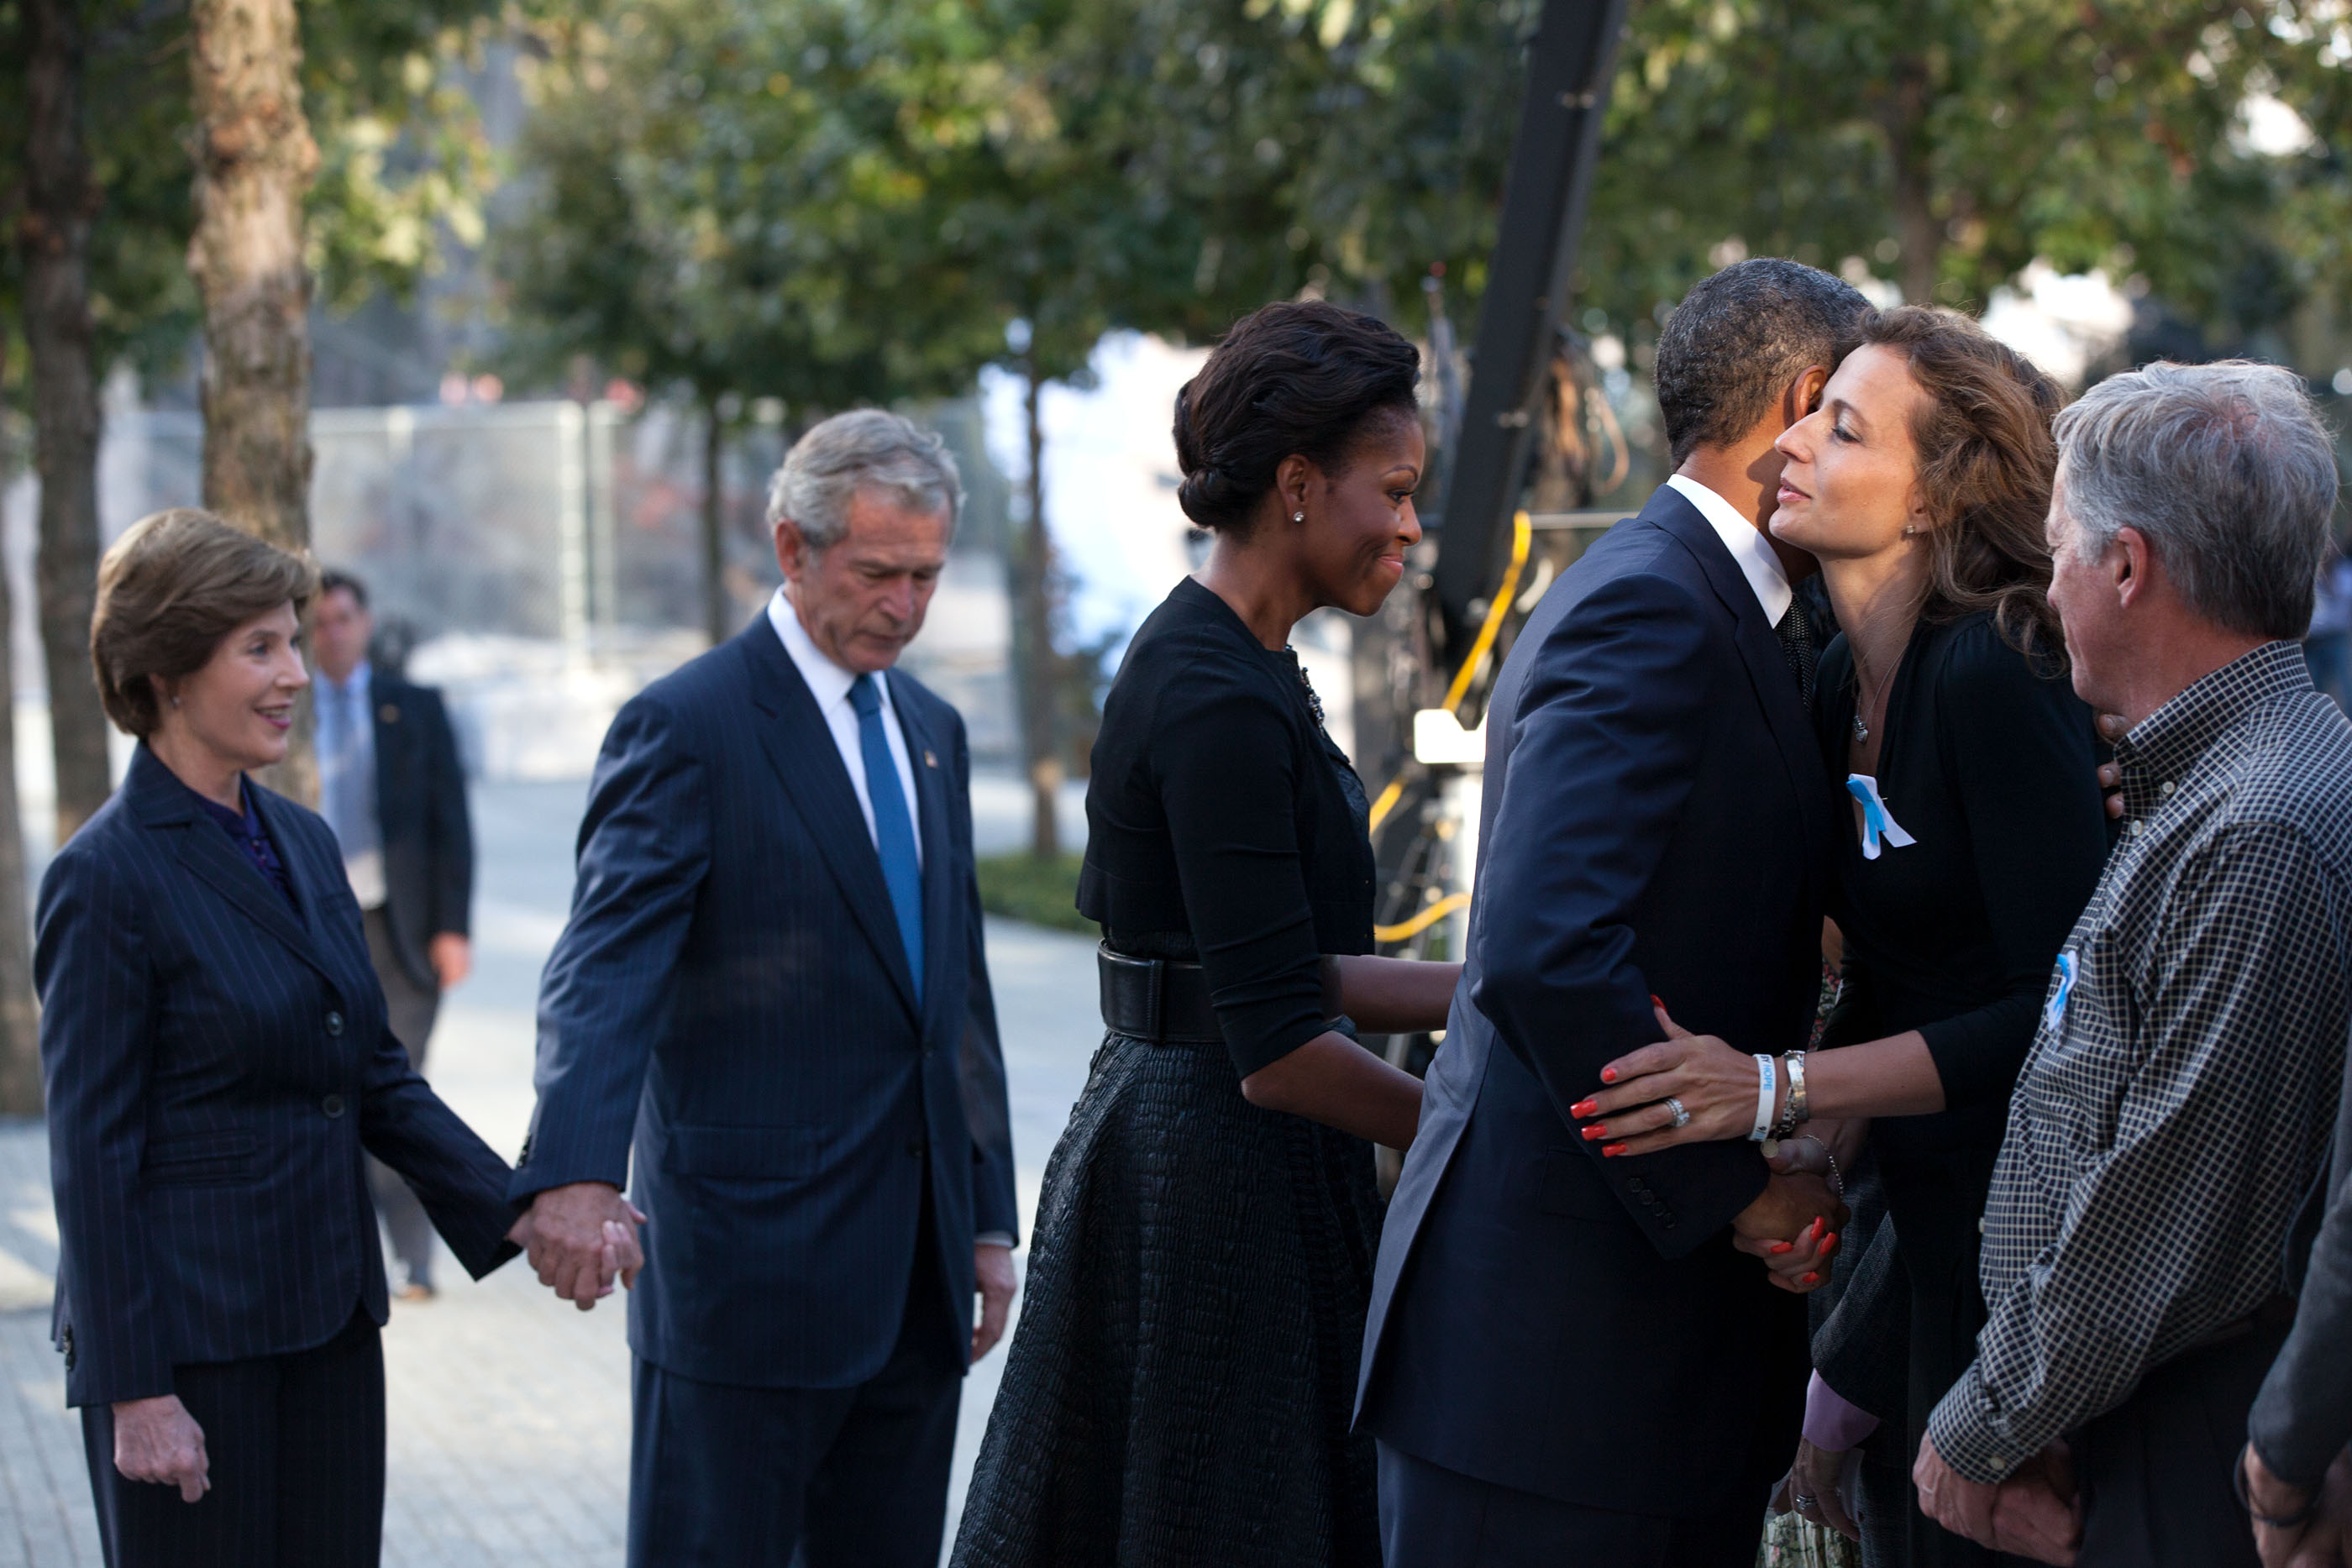 New York, Sept. 11, 2011. Greeting families, with former President and Mrs. Bush, prior to a commemoration ceremony on the tenth anniversary of the 9/11 terrorist attacksPresident and Mrs. Obama. (Official White House Photo by Pete Souza)